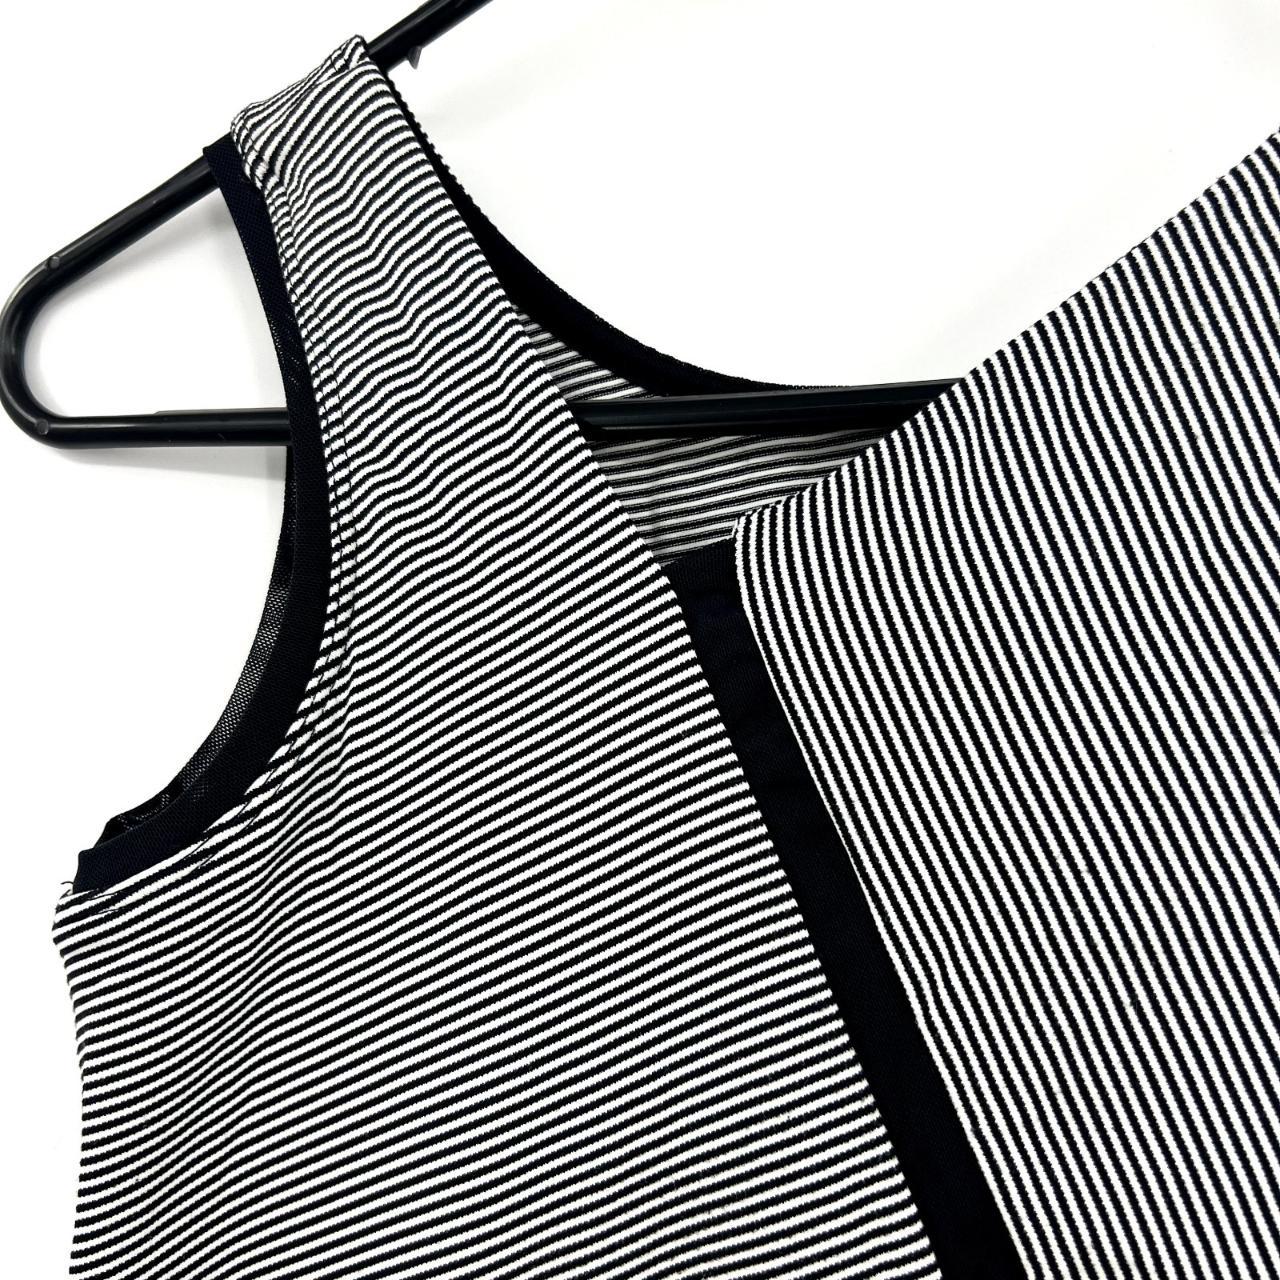 Tail Activewear Dominica Black White Striped Tank - Depop